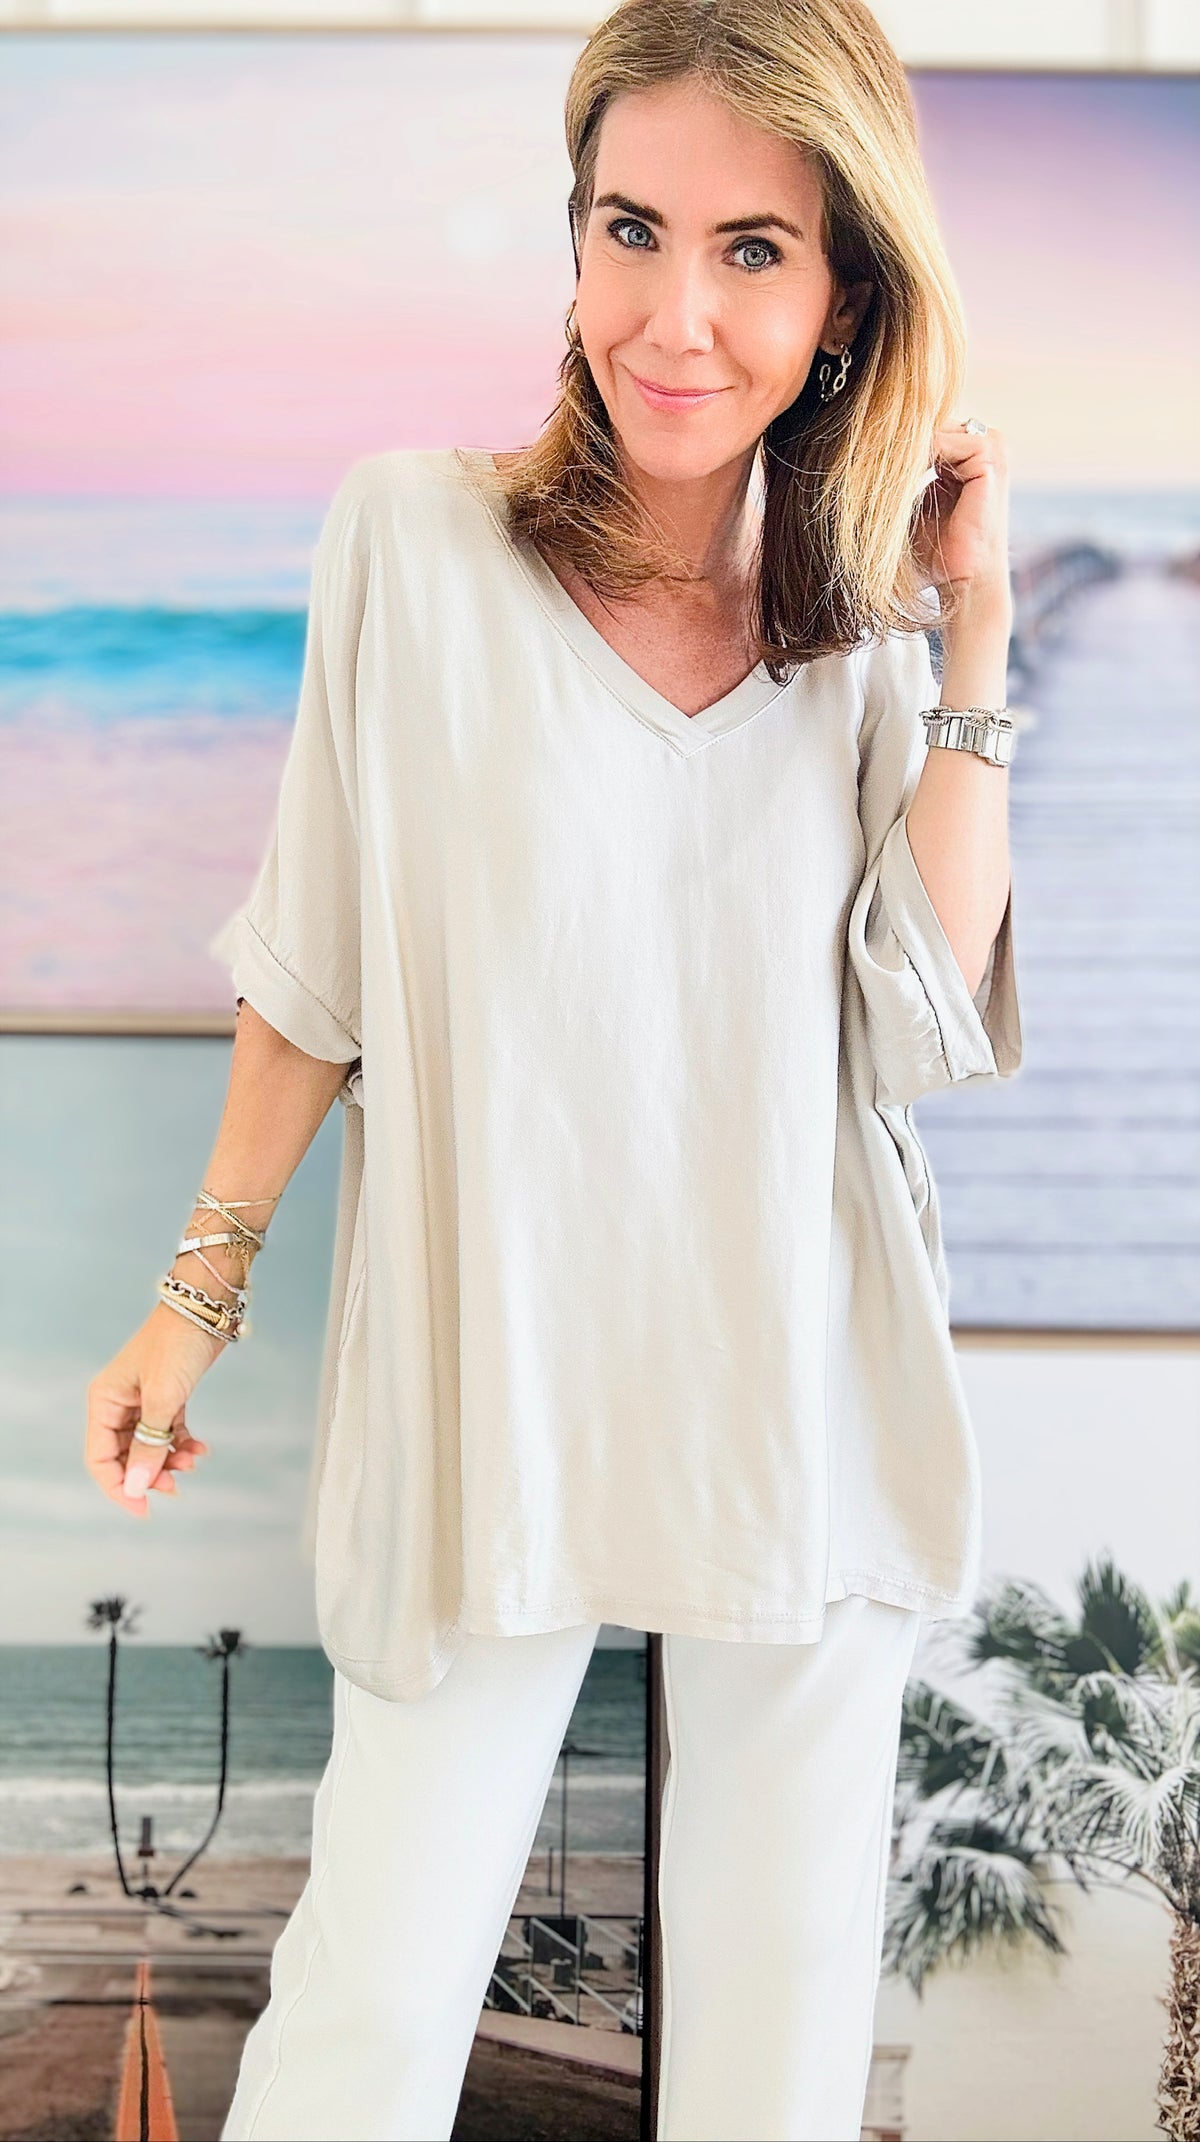 Timeless Italian Blouse - Sand Beige-110 Short Sleeve Tops-Italianissimo-Coastal Bloom Boutique, find the trendiest versions of the popular styles and looks Located in Indialantic, FL